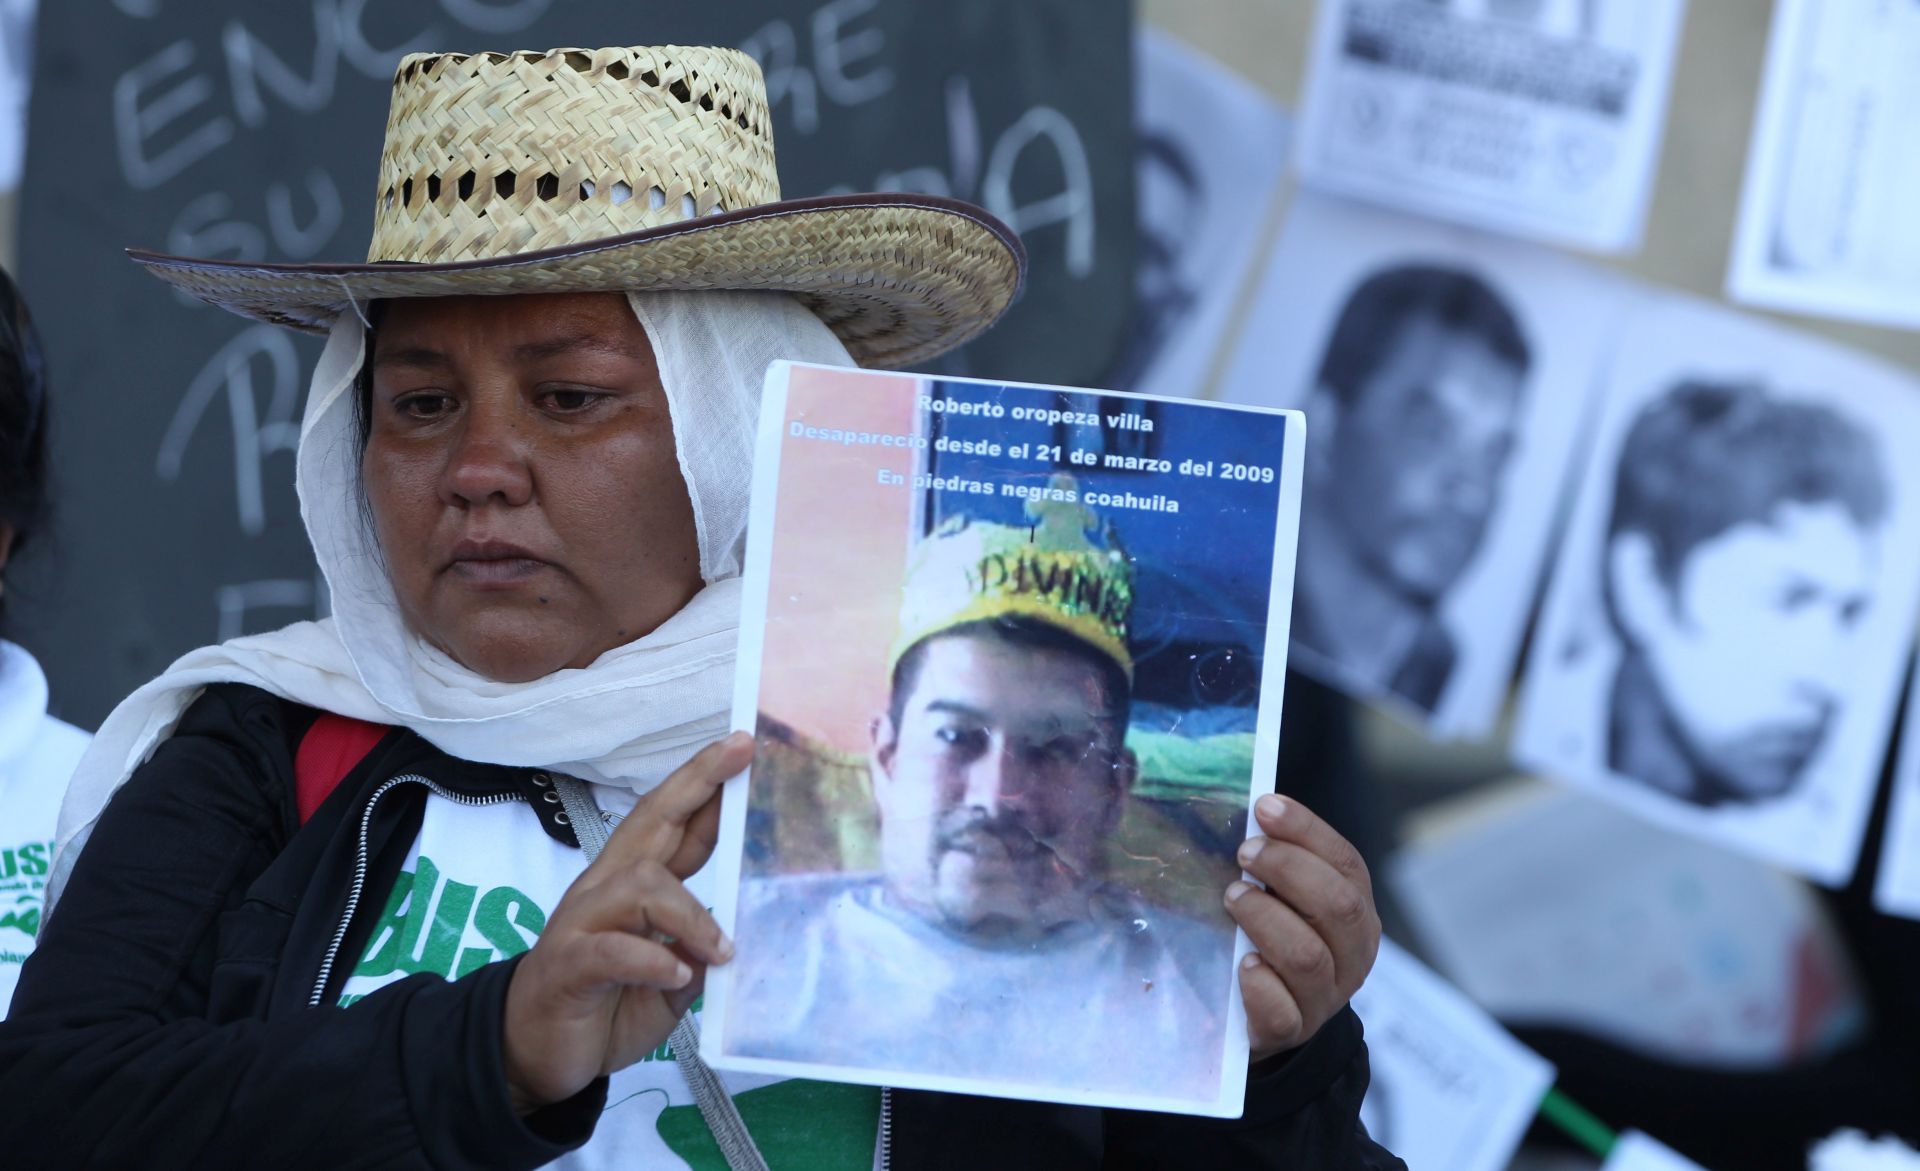 epa07804851 A woman shows a picture of a missing person in front of the National Palace, in Mexico City, Mexico, 30 August 2019.Relatives of missing people also plan to deliver 80.000 signings to demand to the Government better search protocols. At the same time Mexico's President Andres Manuel Lopez Obrador informed that authorities found 4974 bodies in 3024 clandestine graves between 2006 and mid-August 2019.  EPA/Mario Guzmán